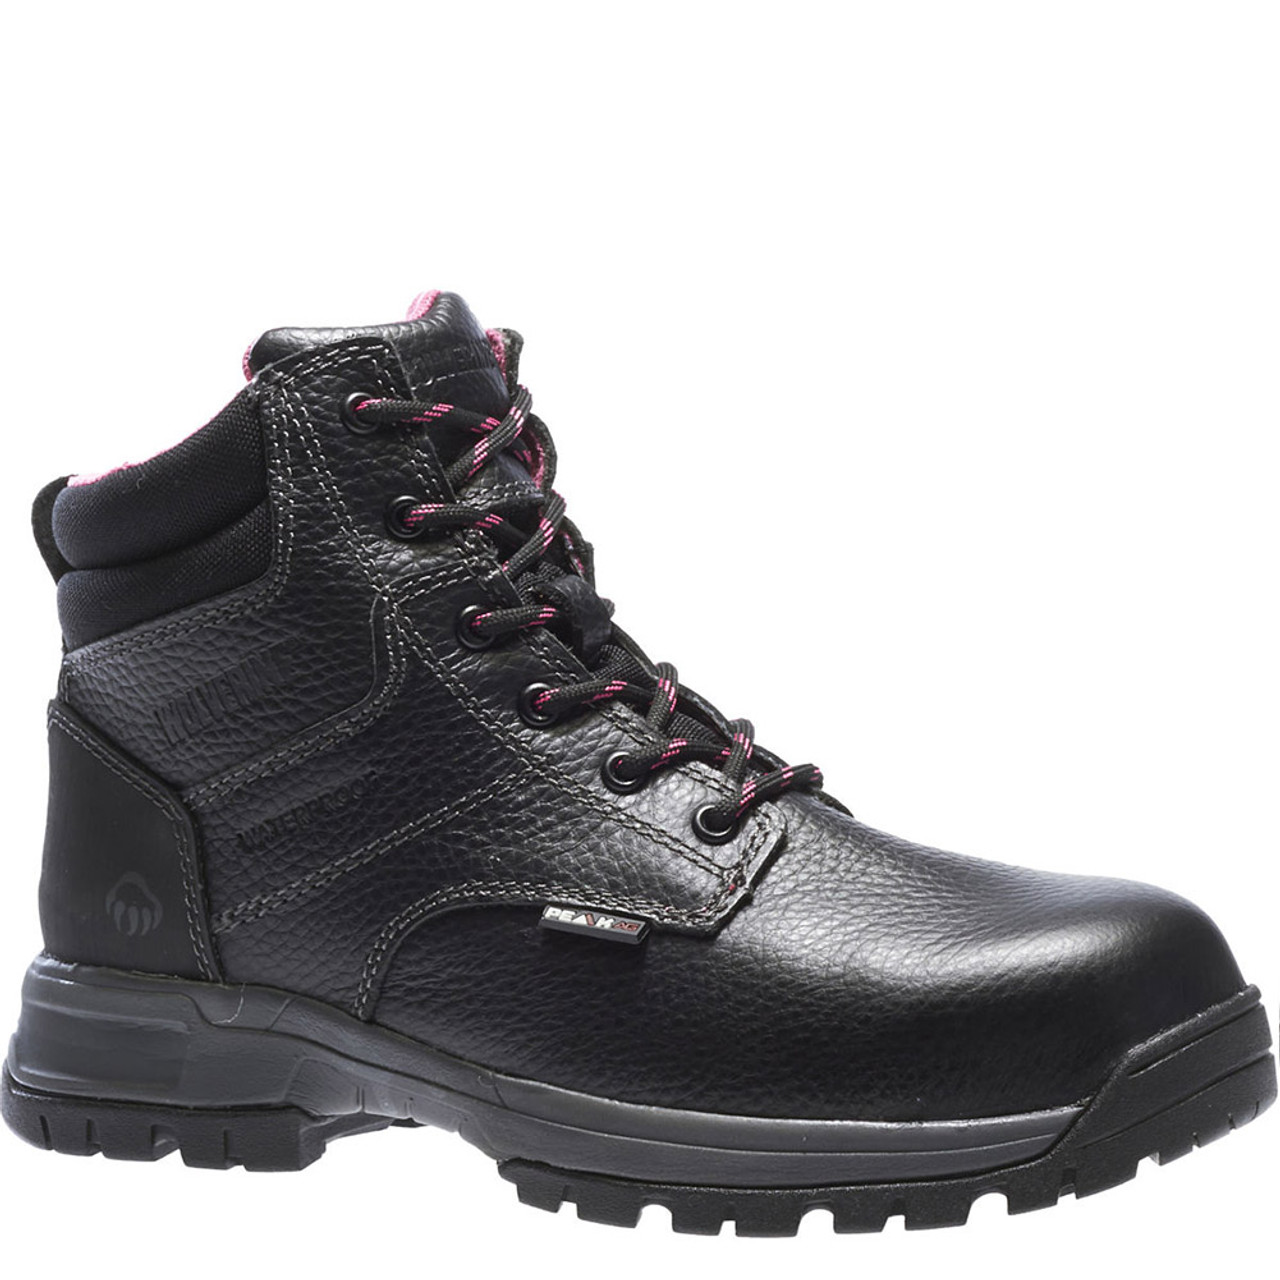 womens composite work boots